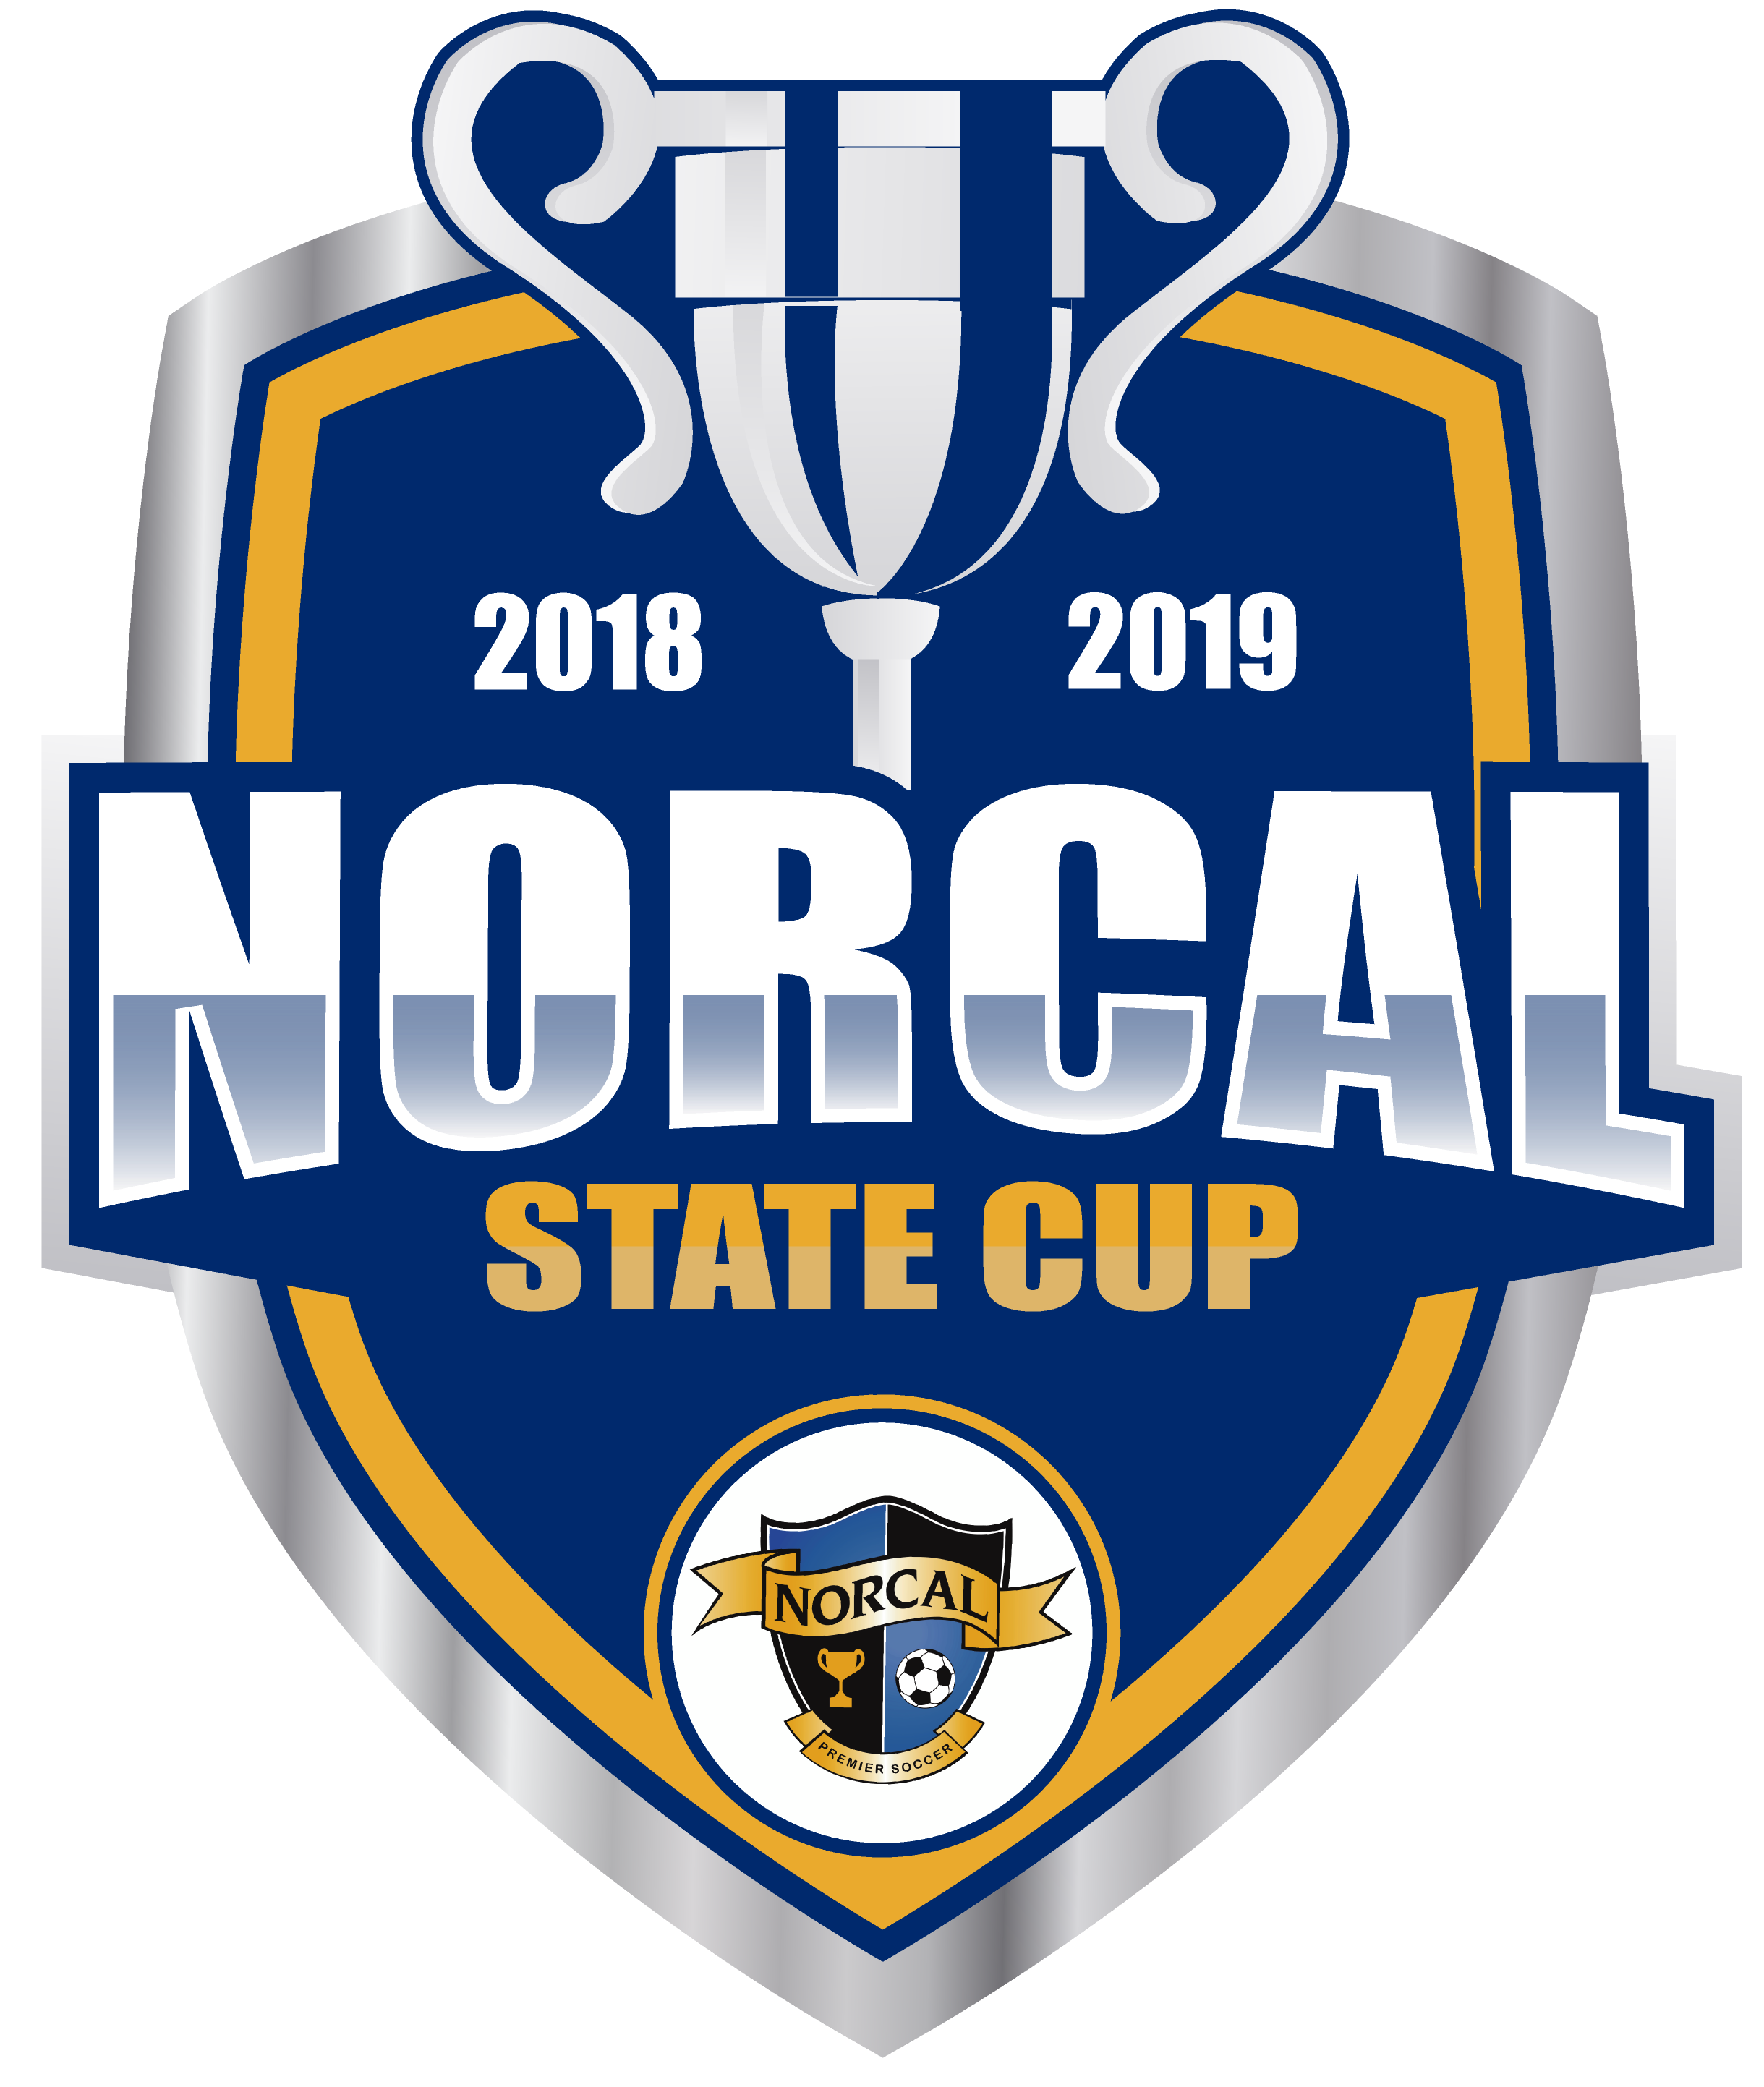 1 us cup. State Cup. NORCAL logo.